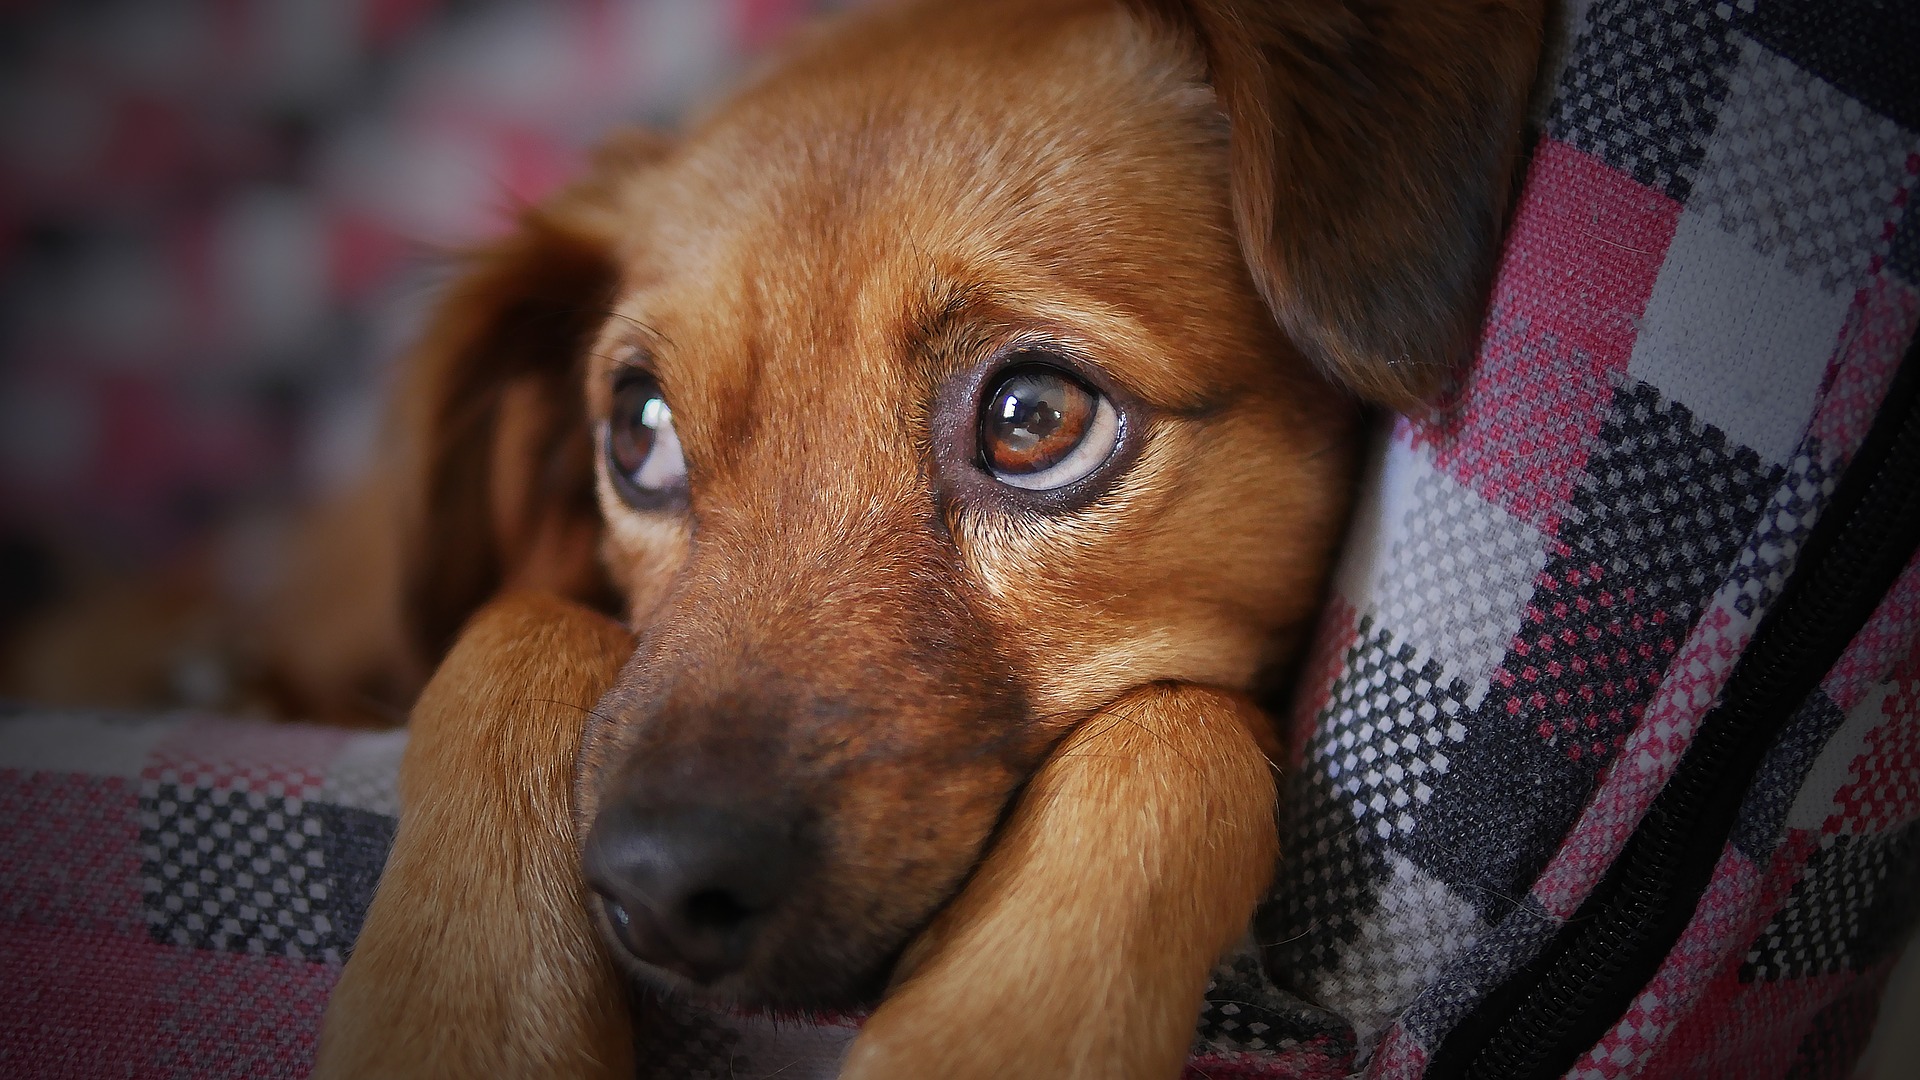 Can Dogs Take Pain Meds? How to Deal With a Dog's Pain |